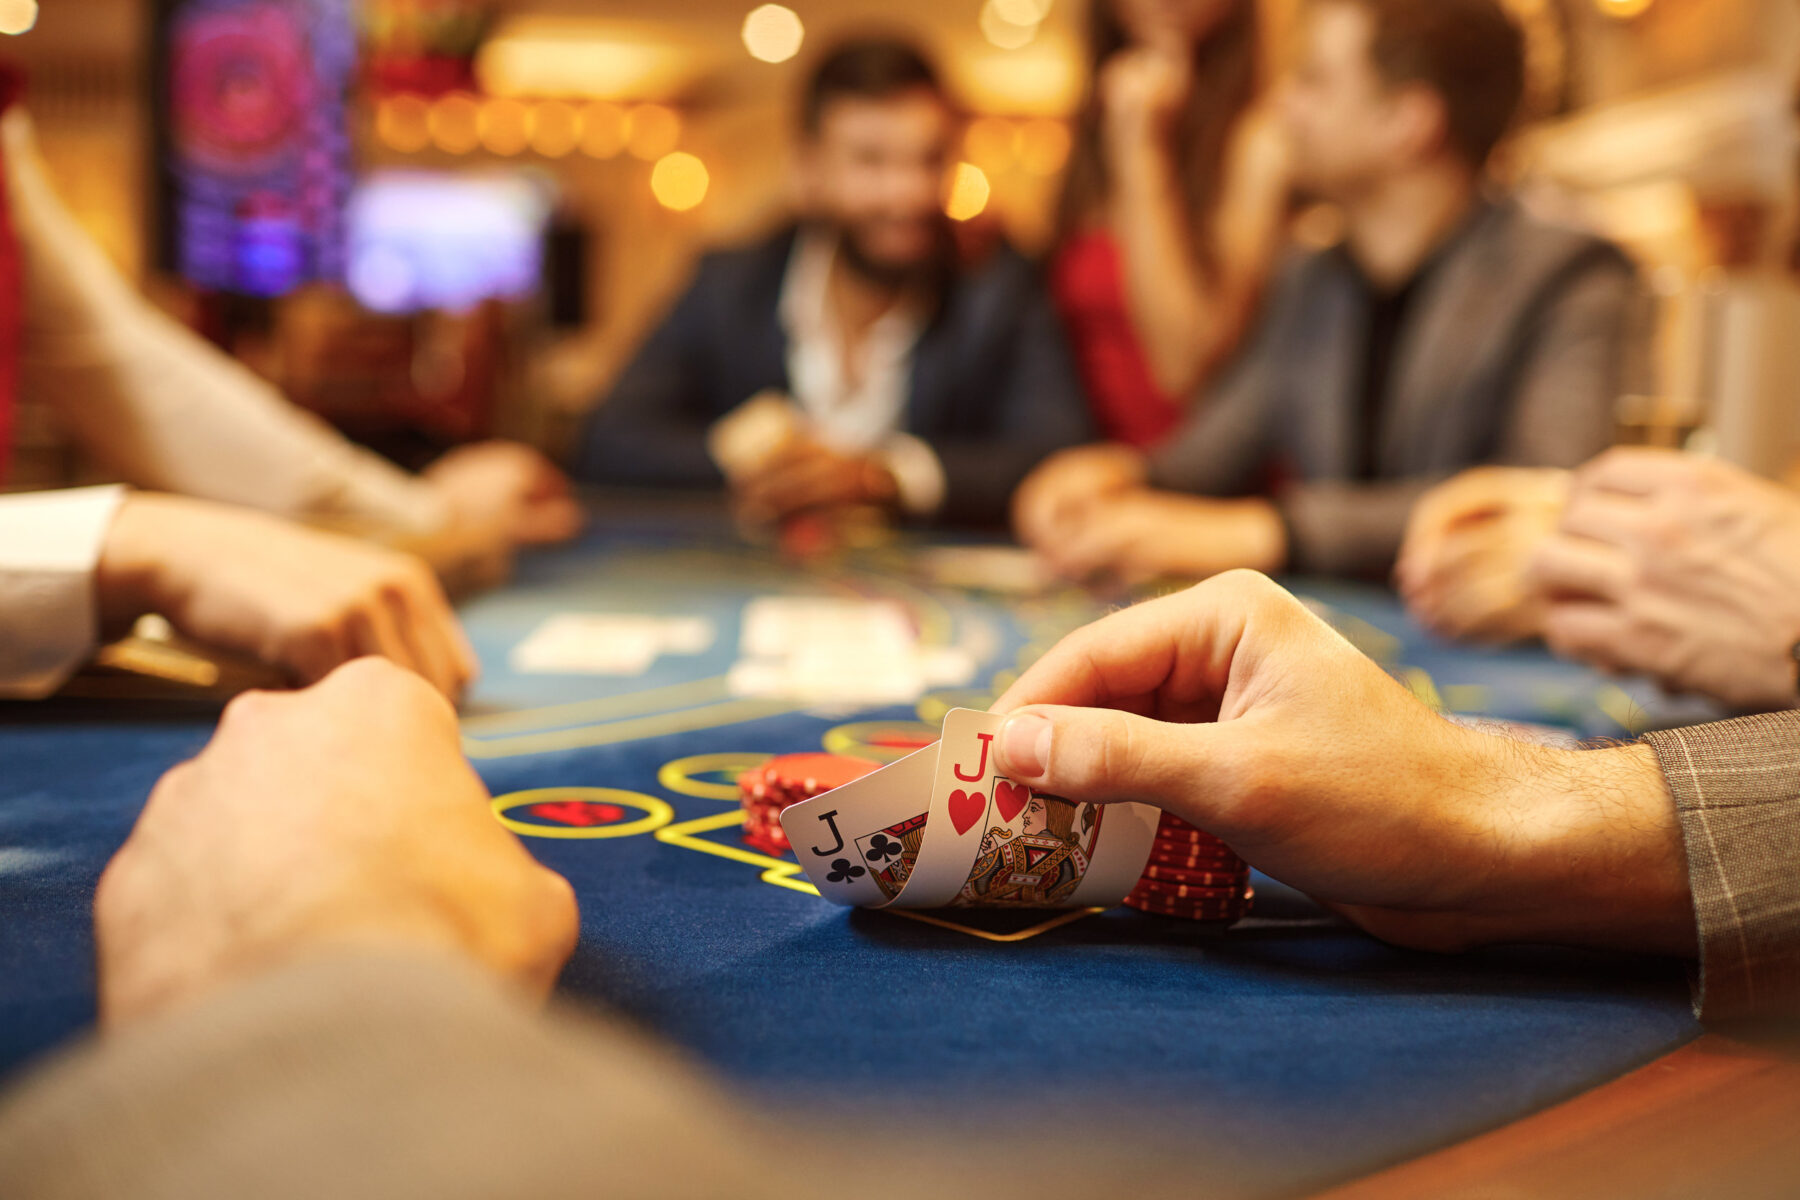 How to Host the Best Casino Night in Nashville from Entertain! featured on Nashville Bride Guide